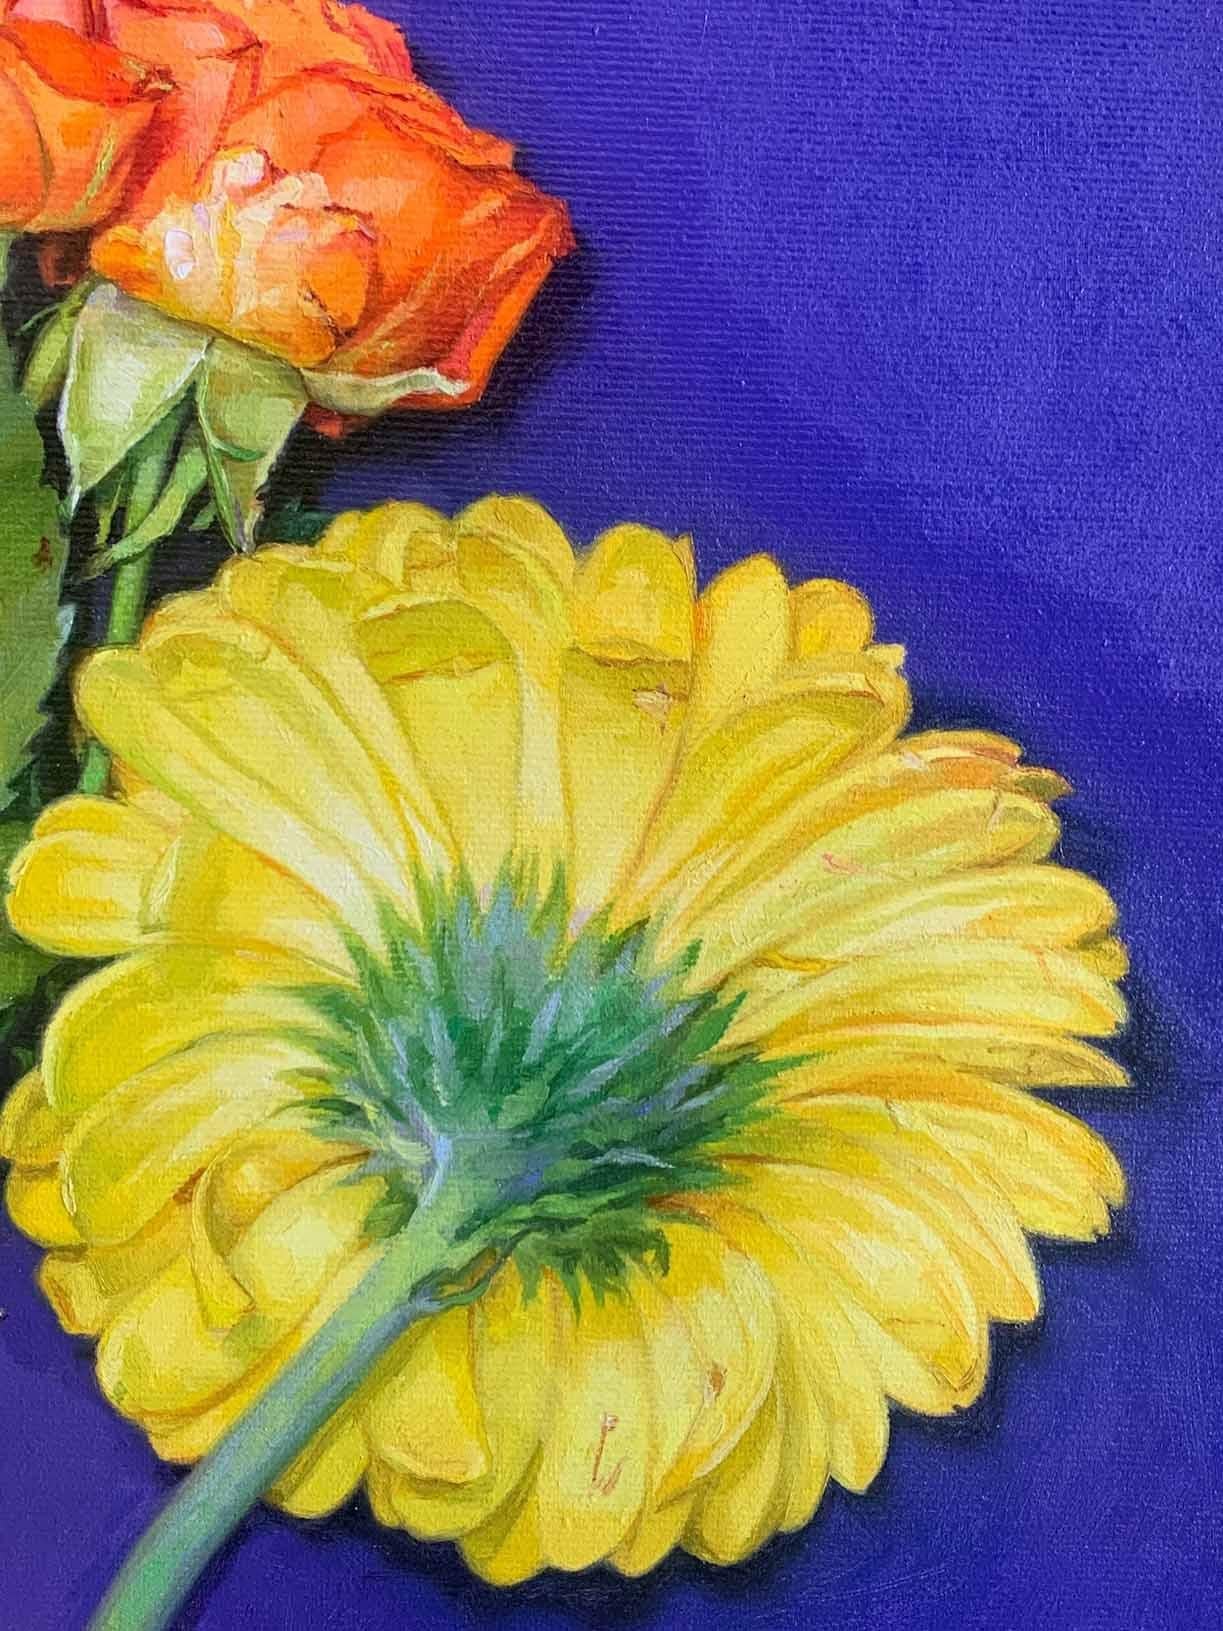 Summer Flowers - Painting by Victoria Kalaichi